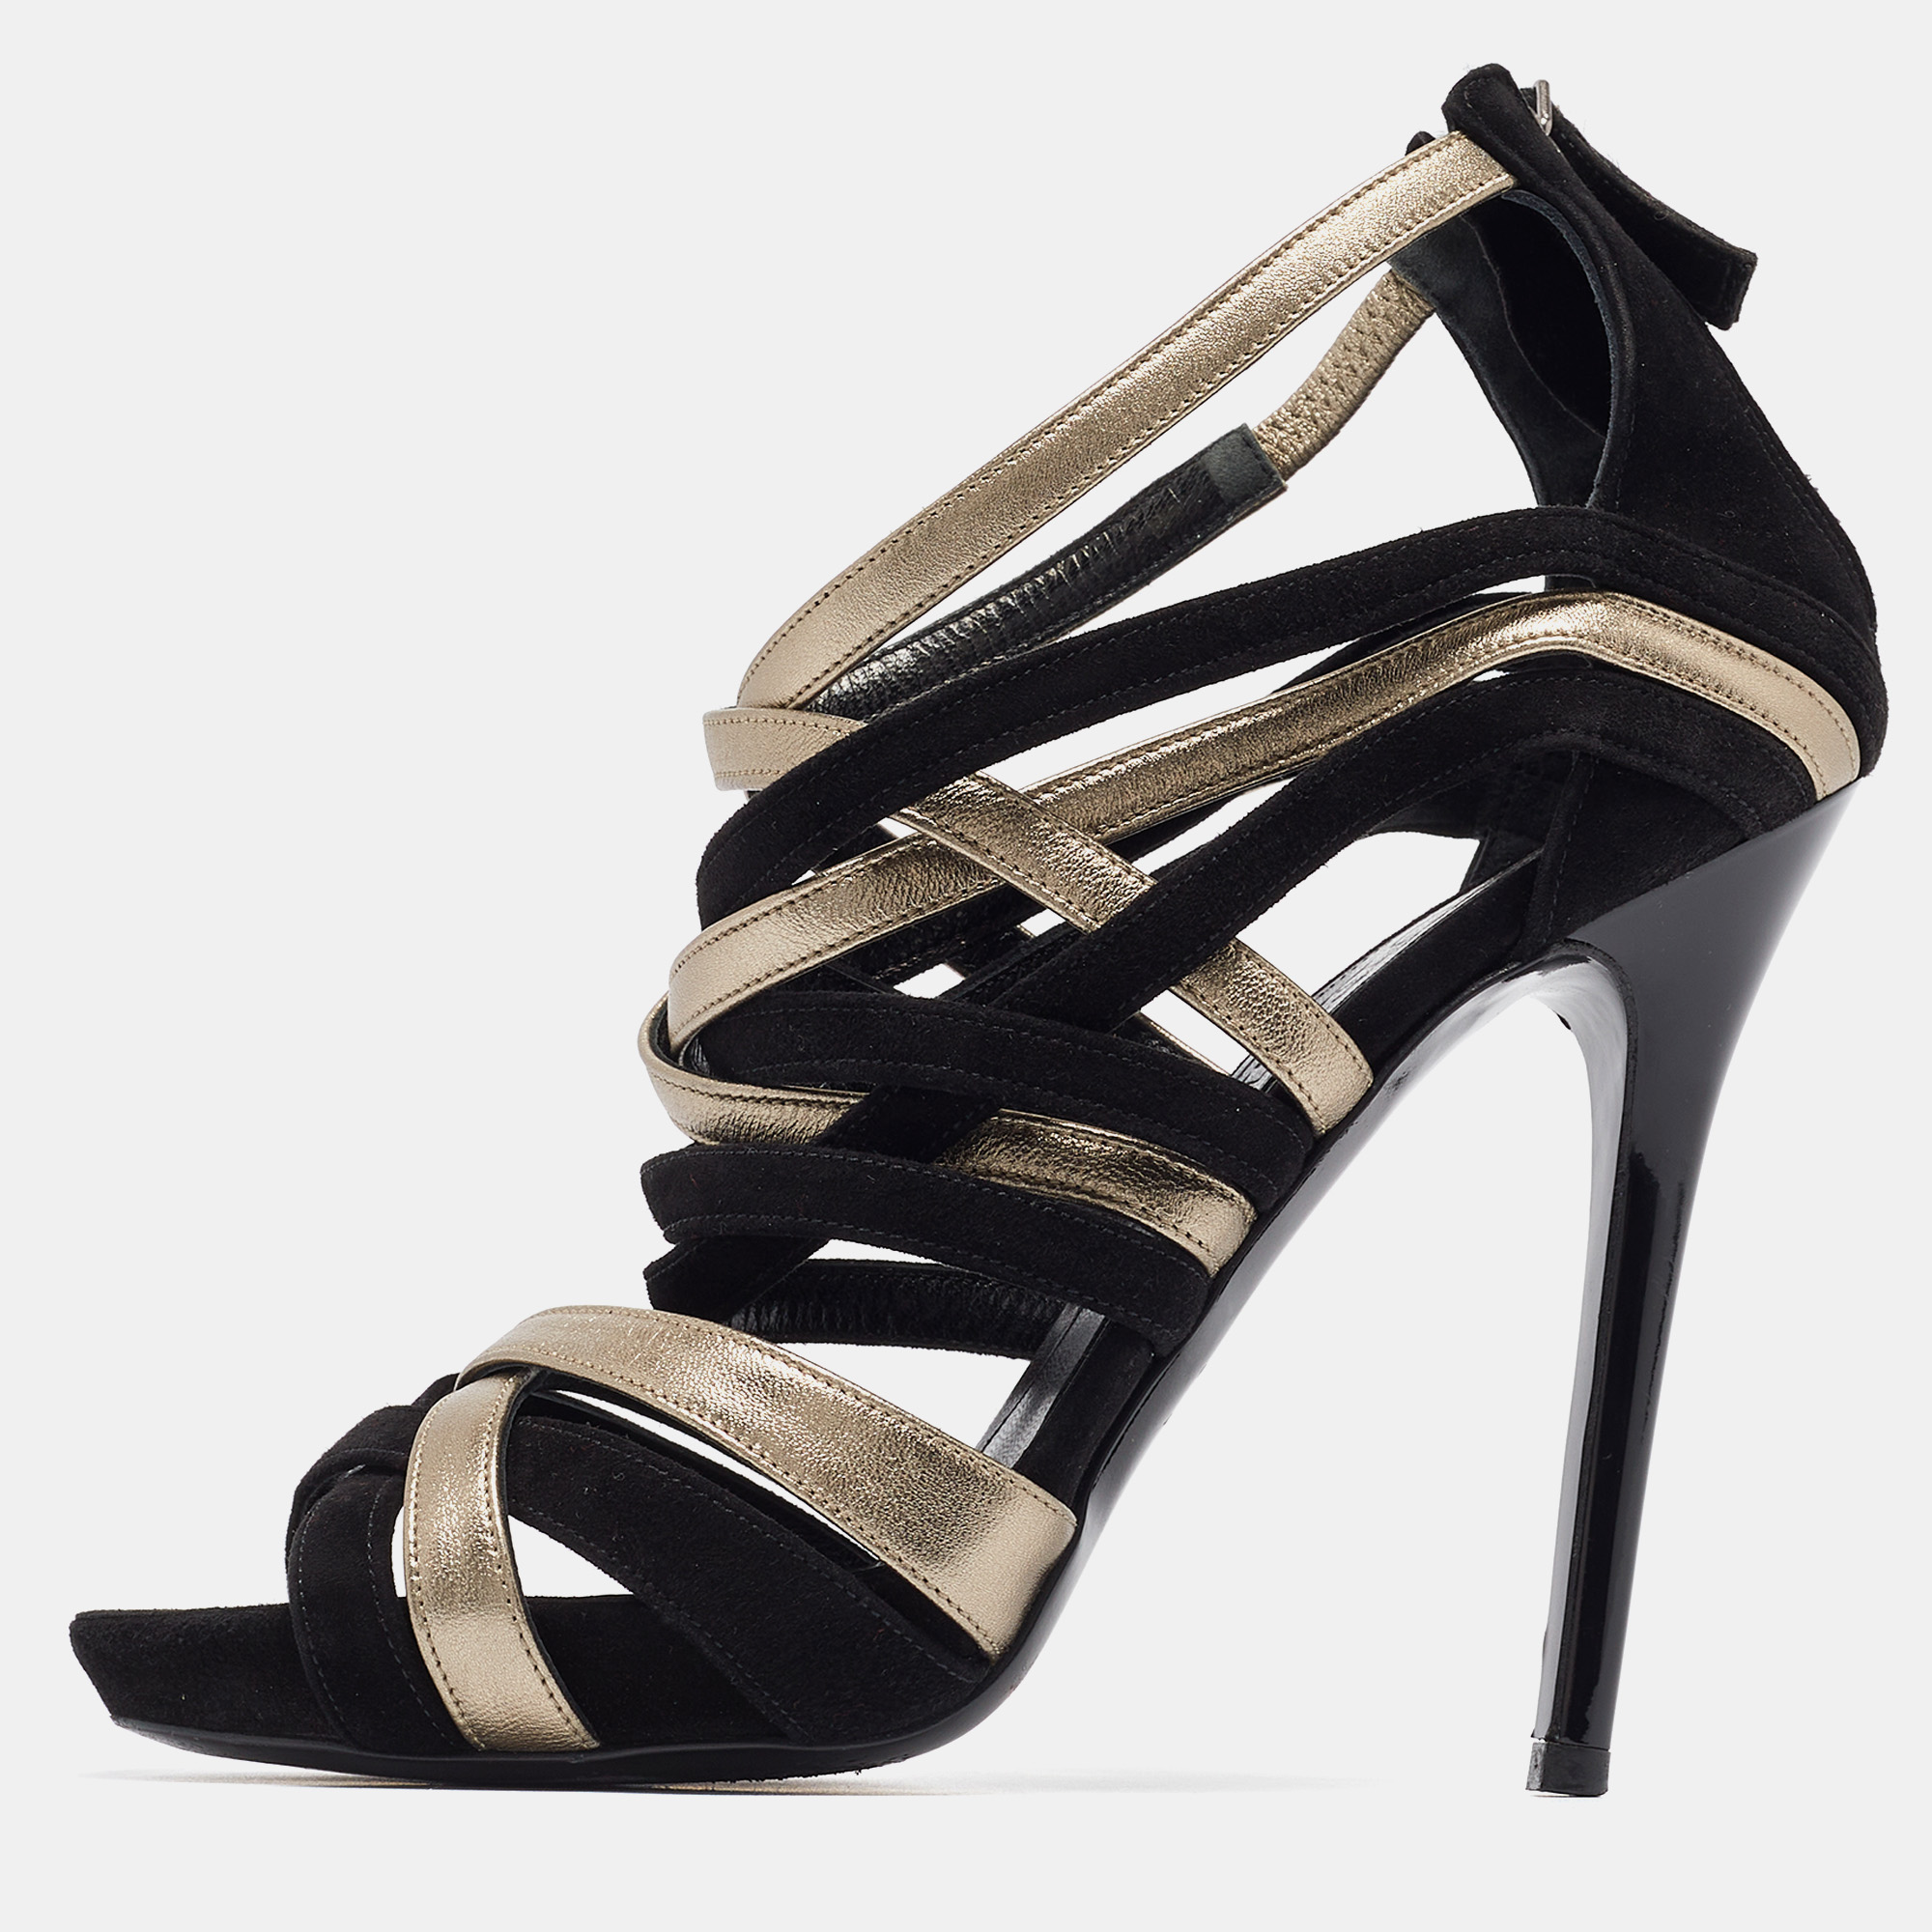 Alexander mcqueen black/grey leather and suede strappy sandals size 37.5